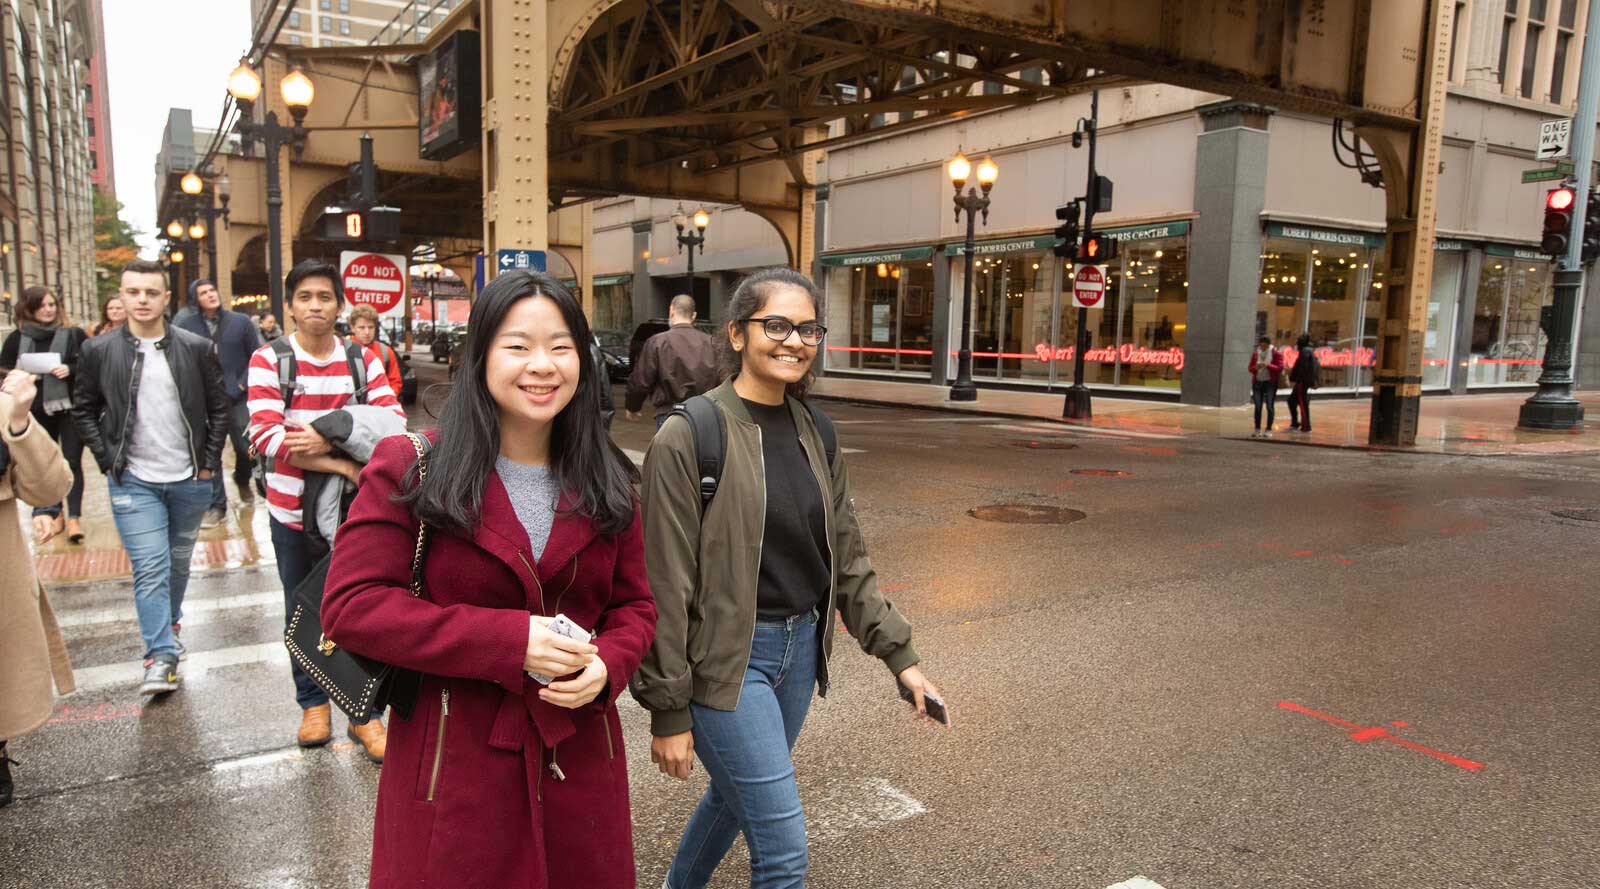 Diverse group of students crosses a cross walk in the city